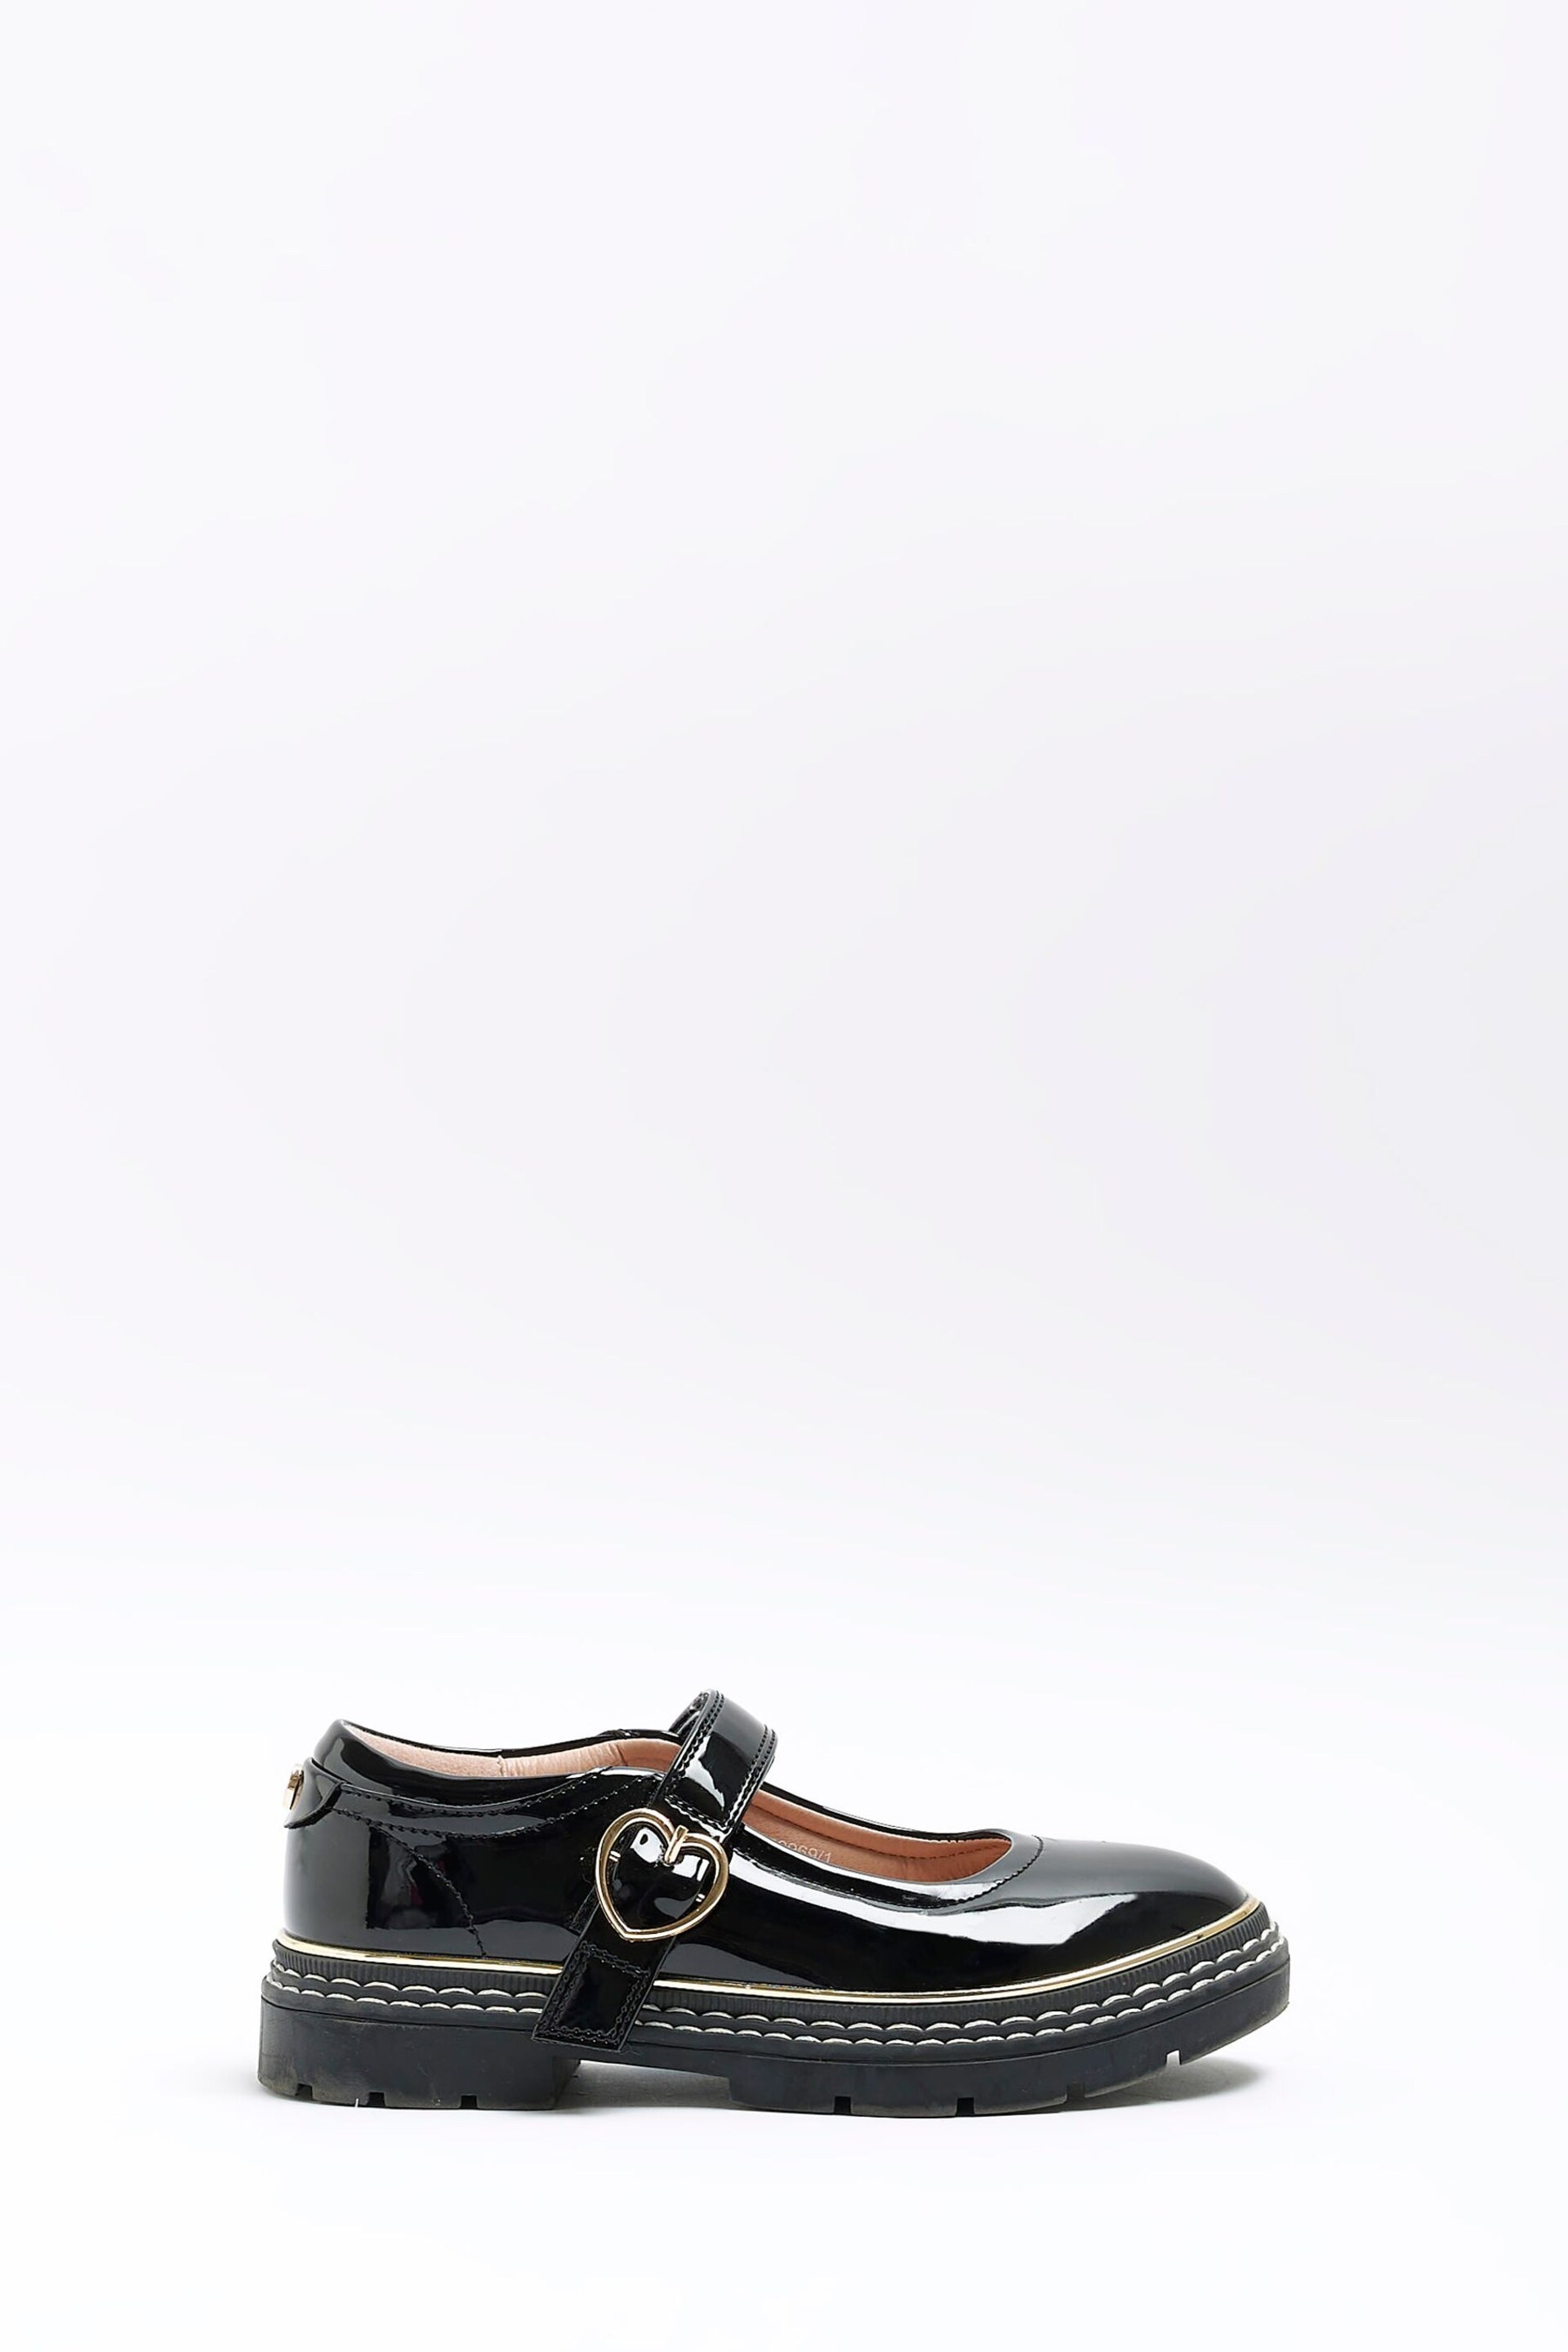 River Island Black Girls Heart Buckle Mary Jane Shoes - Image 1 of 4